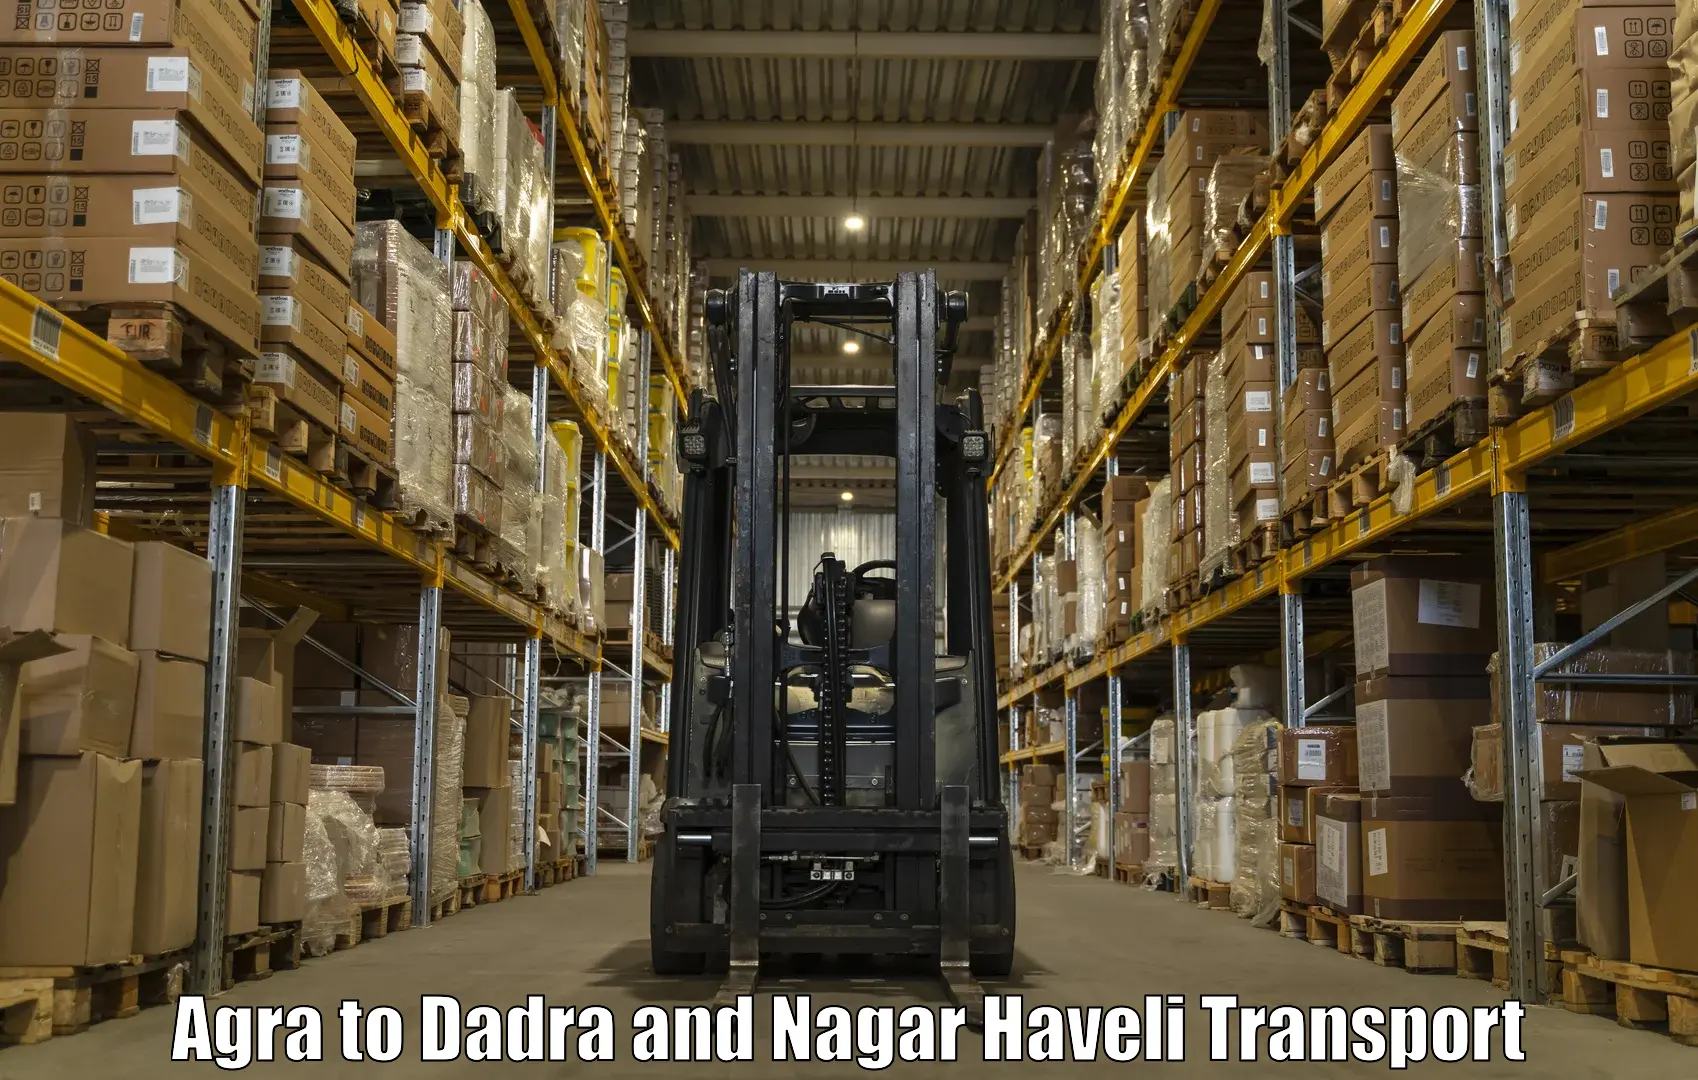 Shipping services in Agra to Silvassa